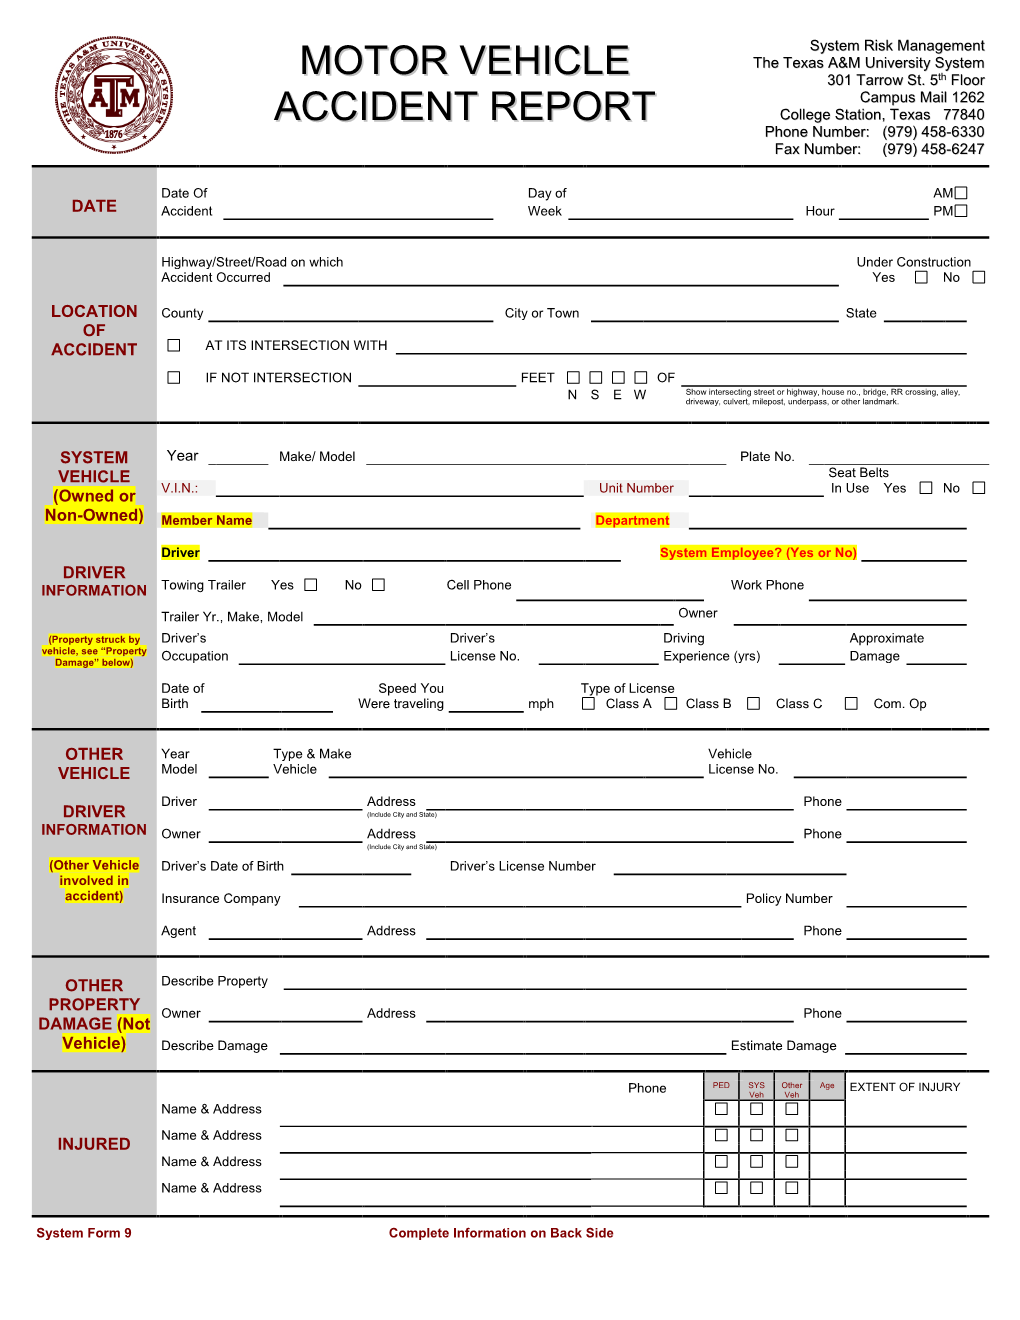 Motor Vehicle Accident Report